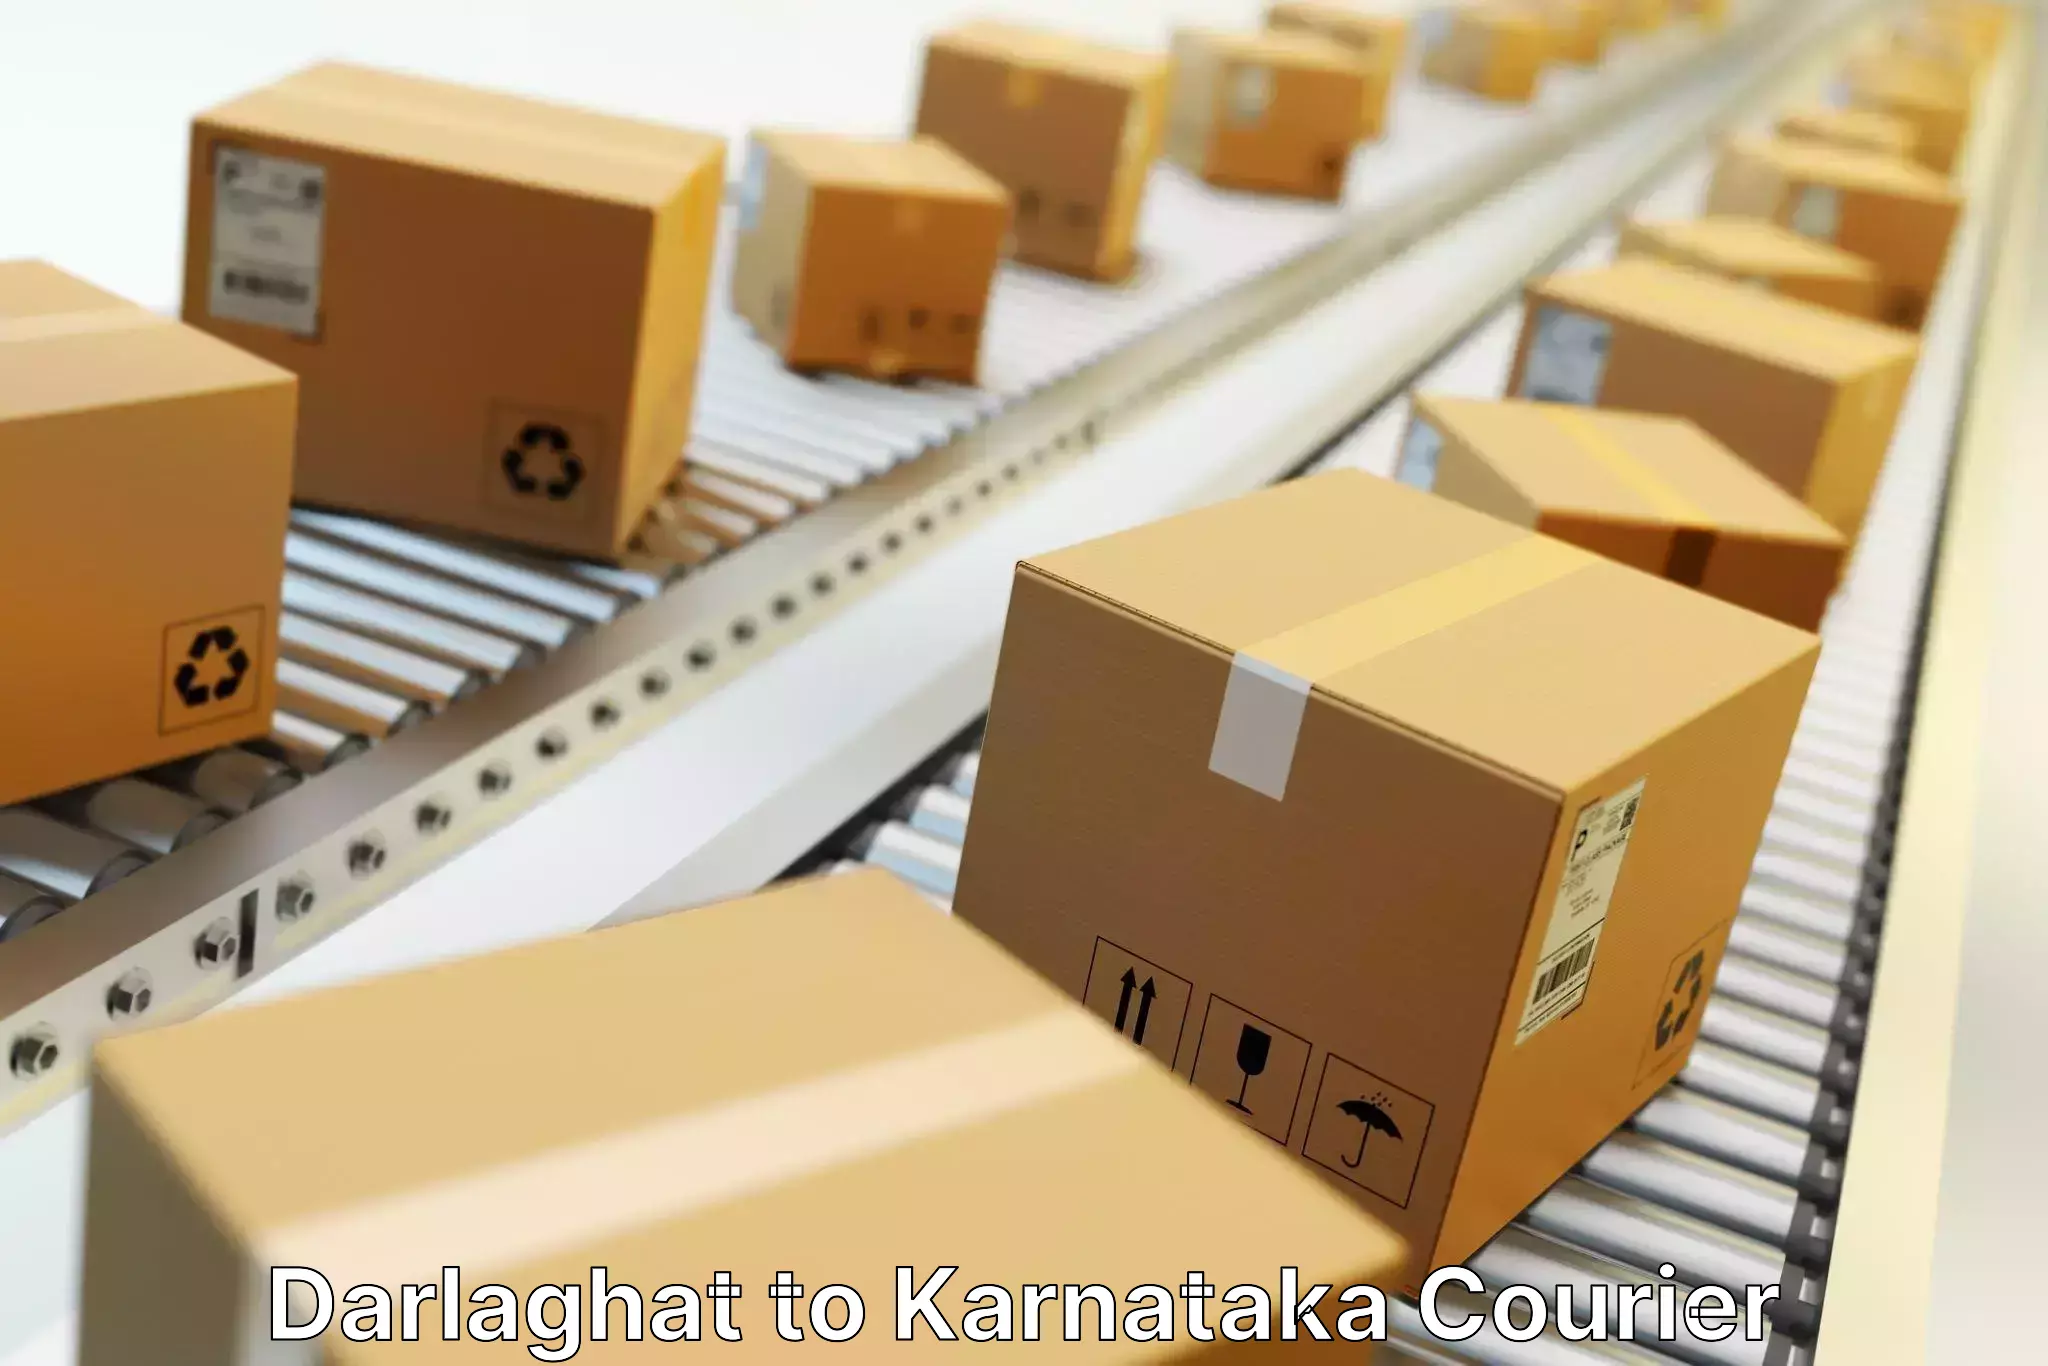 Fast delivery service Darlaghat to Karnataka